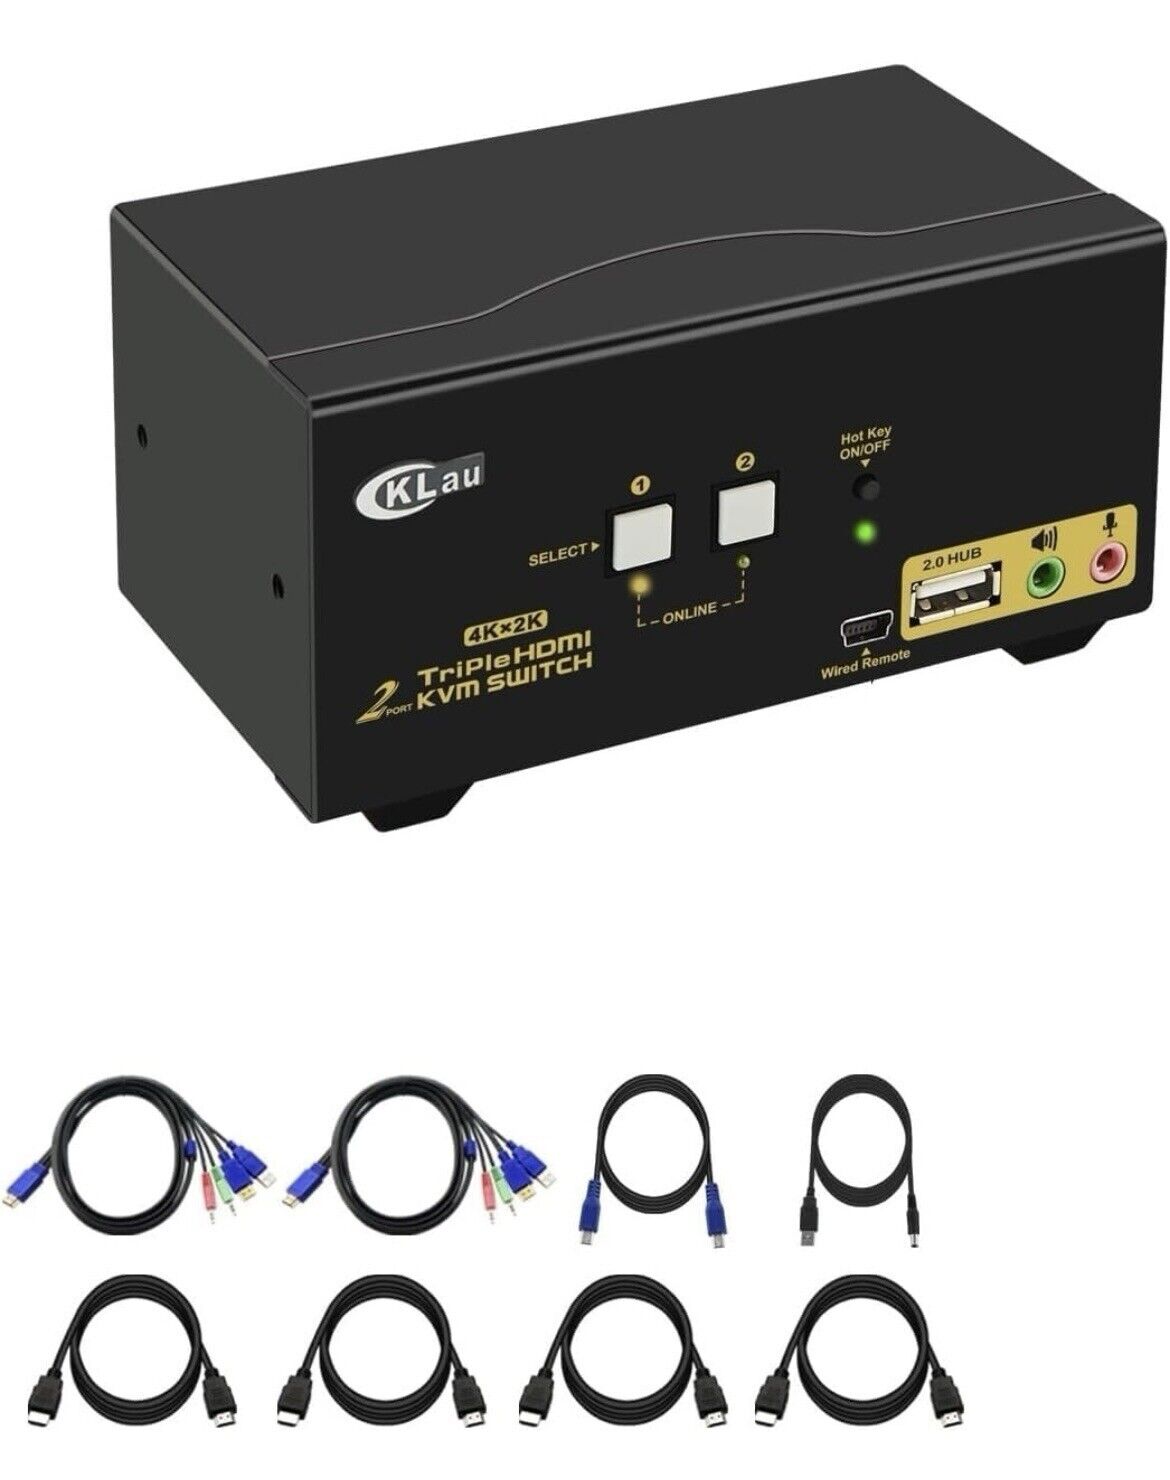 1267-CKLau 4Kx2K@60Hz Dual Port 3 Monitor KVM Switch HDMI with Audio and Cables.